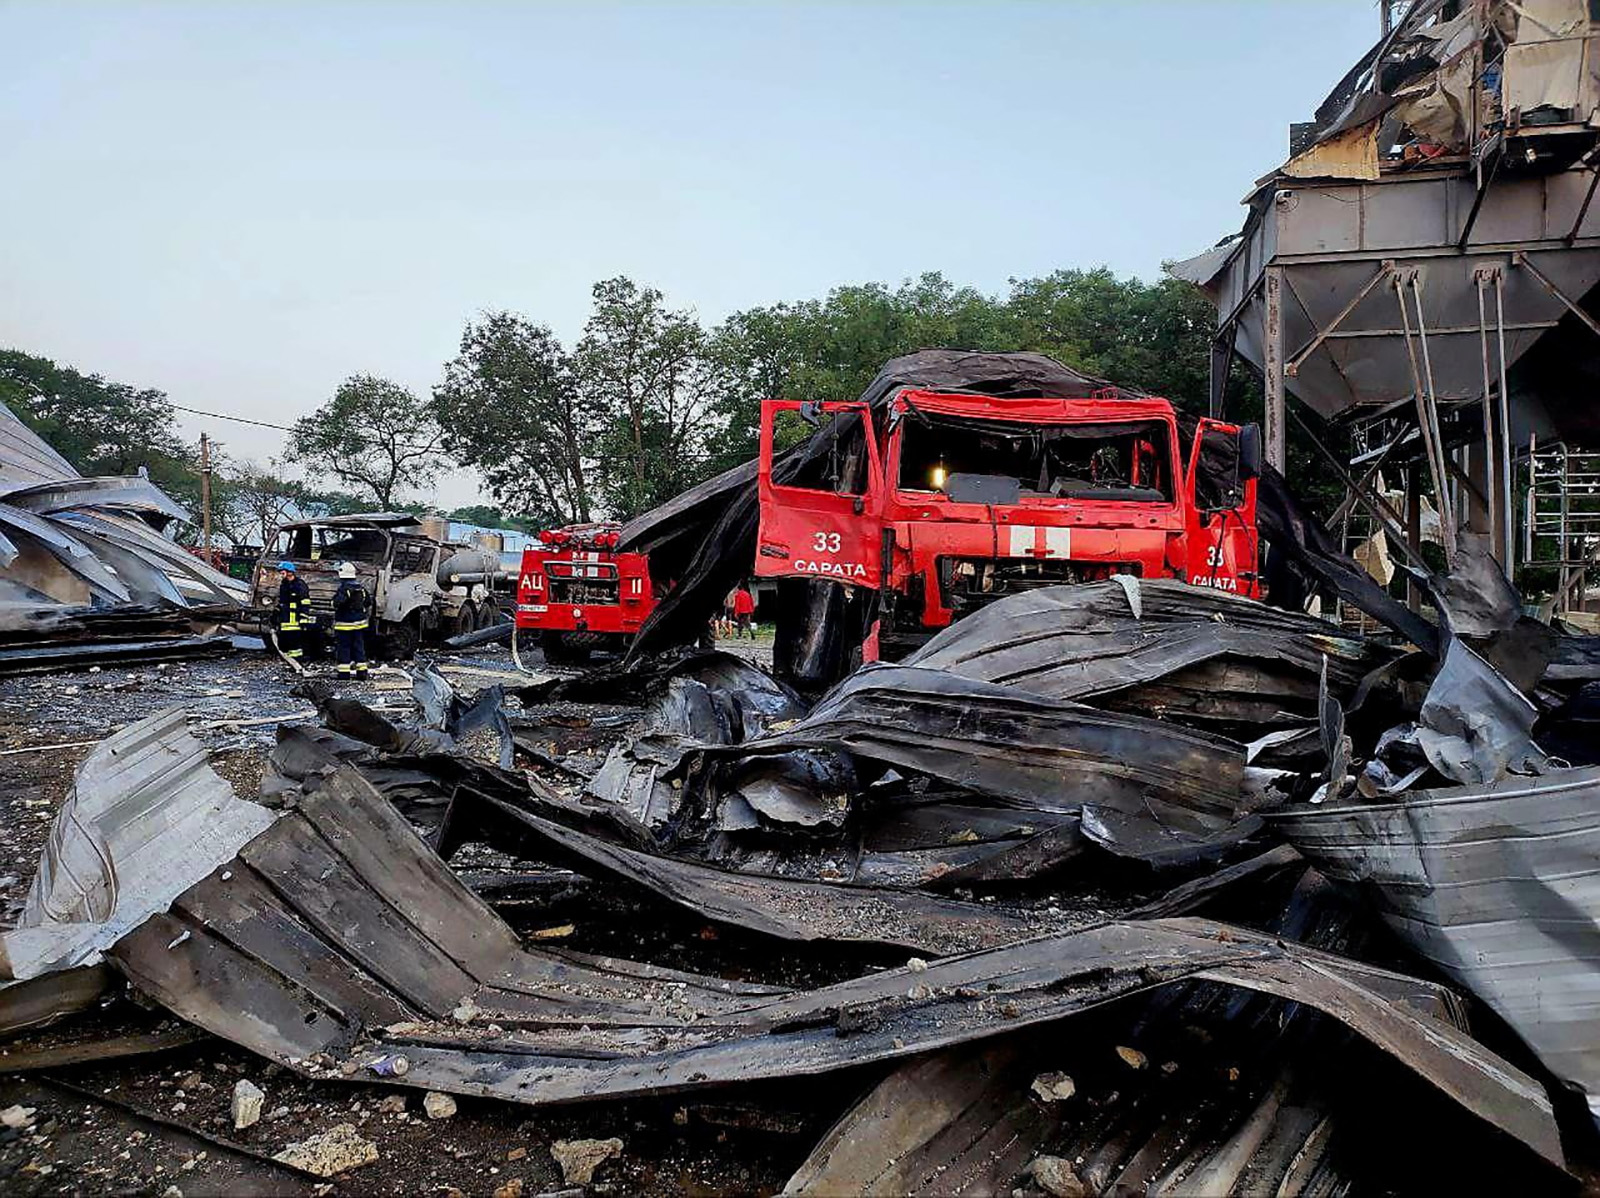 A heavily damaged emergency vehicle is seen at a compound of an agricultural company hit by a Russian missile strike in Odesa region, Ukraine, on July 21.